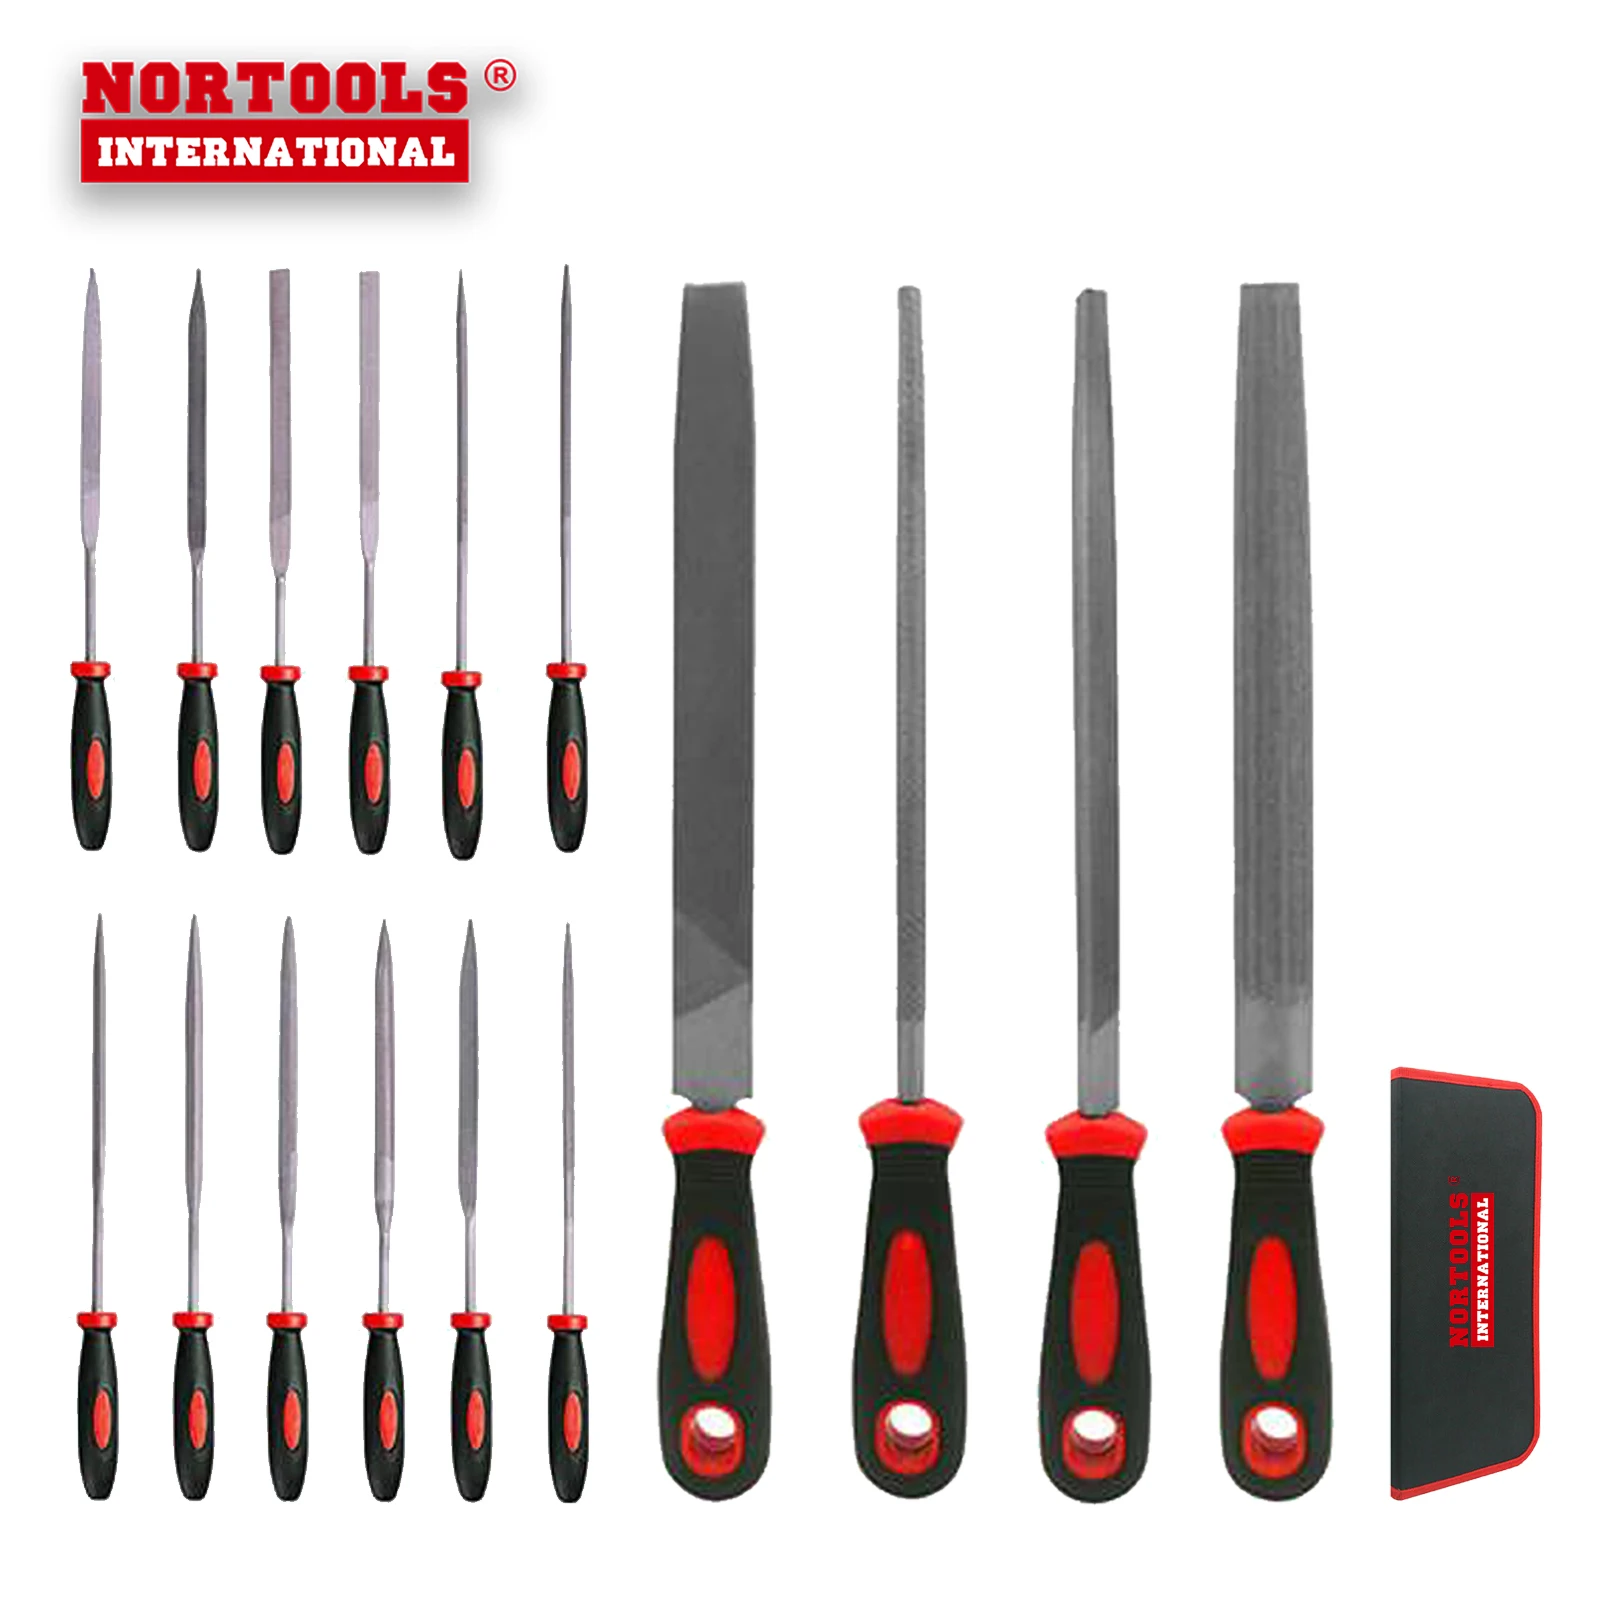 16X T12 Drop Forged Alloy Steel File Set for Woodwork Metal Model & Hobby UK 